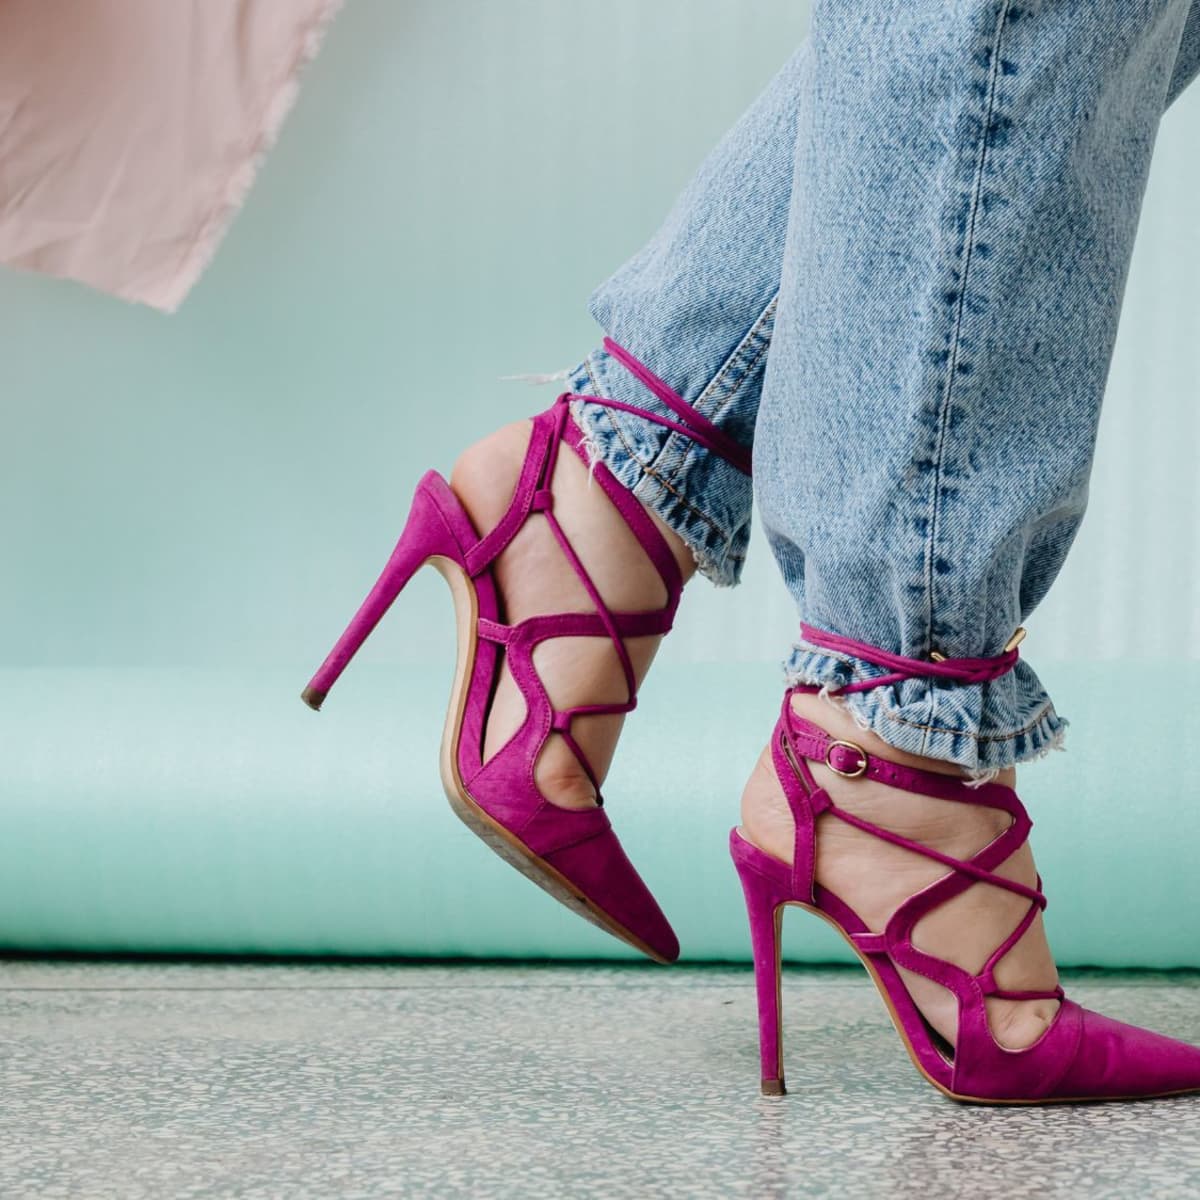 This Is What Wearing Heels All Day Does To Your Body | HuffPost Life